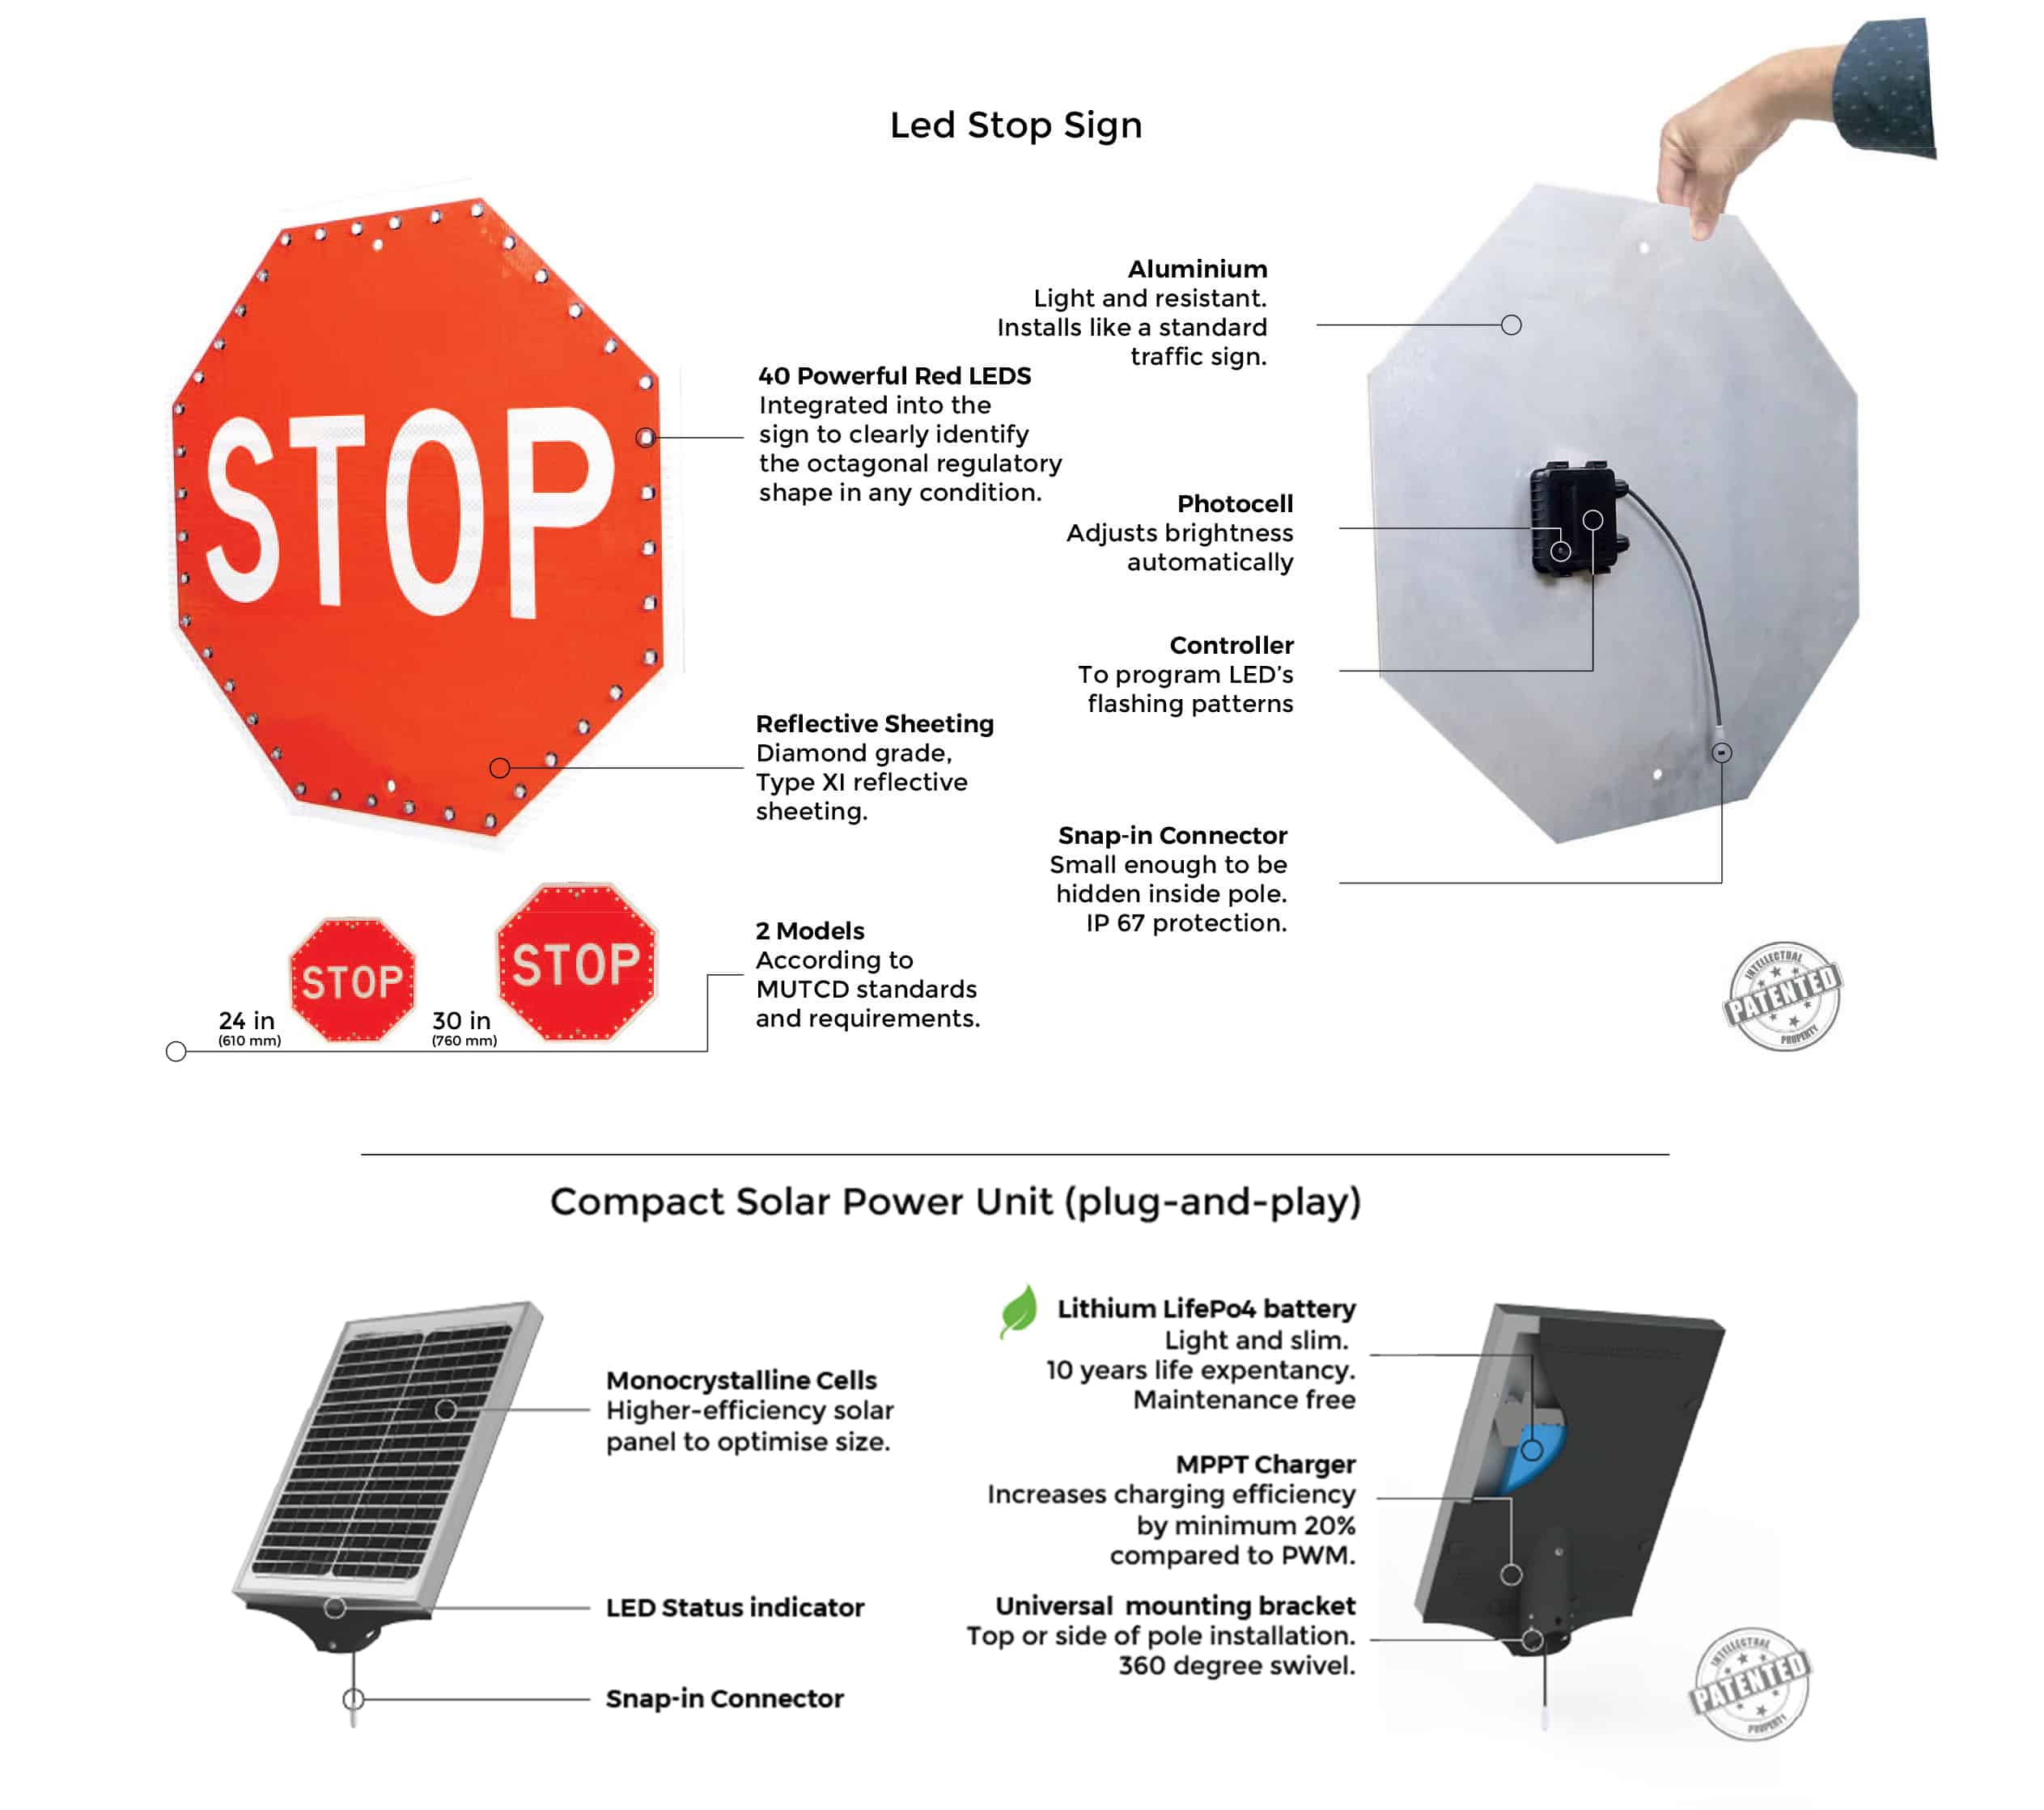 Luminous LED stop sign - Electronic Traffic Sign - THIN - Traffic Innovation